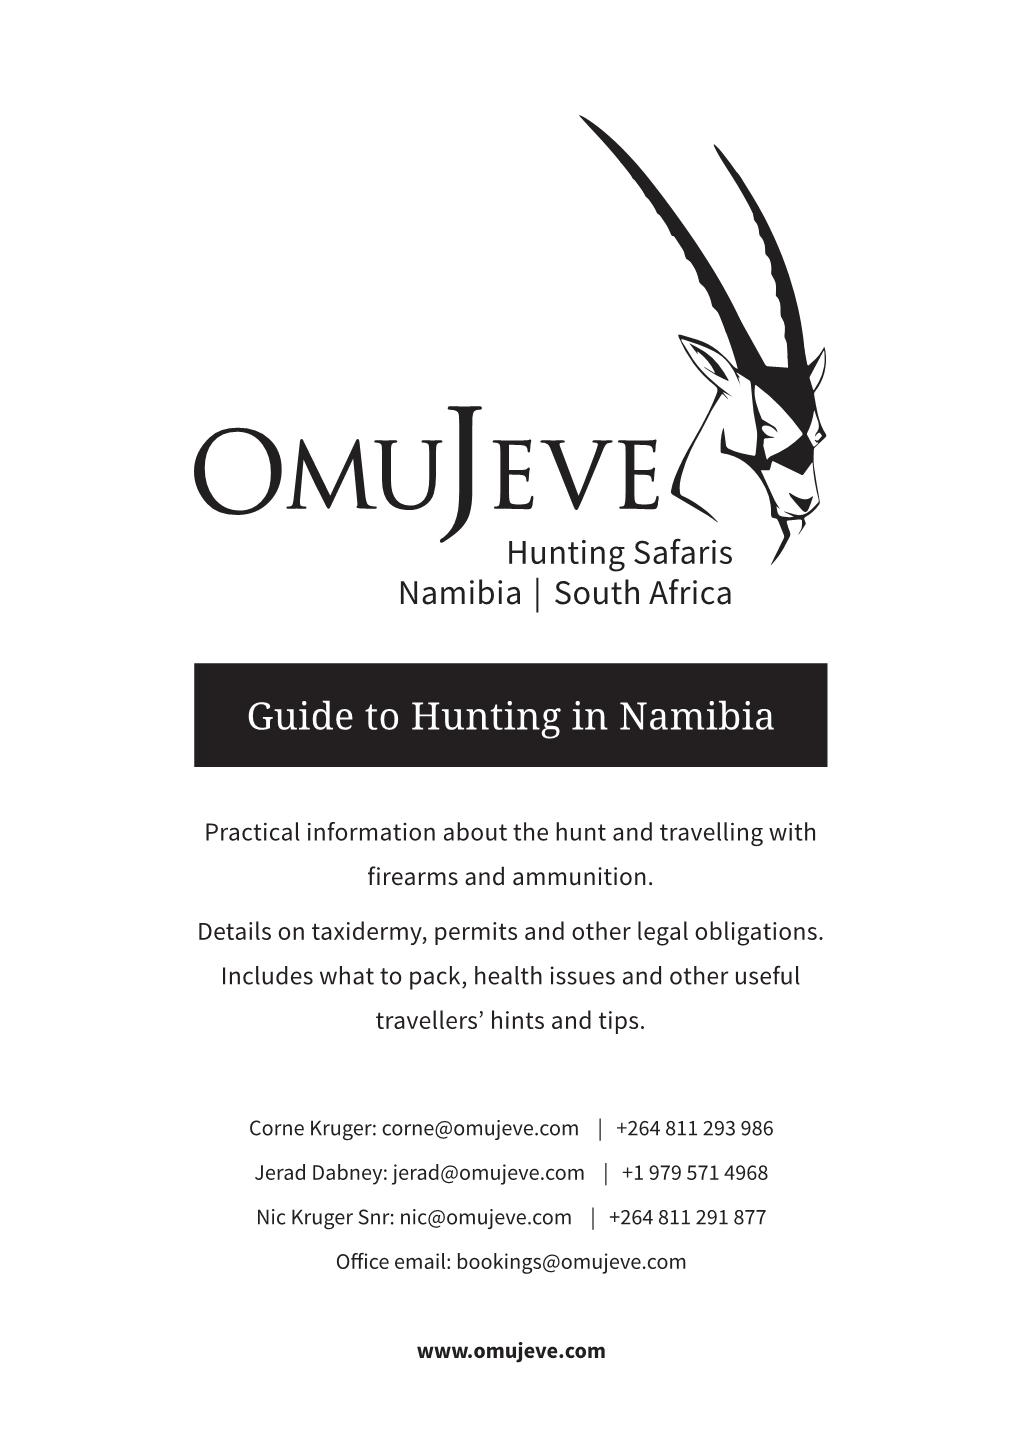 Guide to Hunting in Namibia